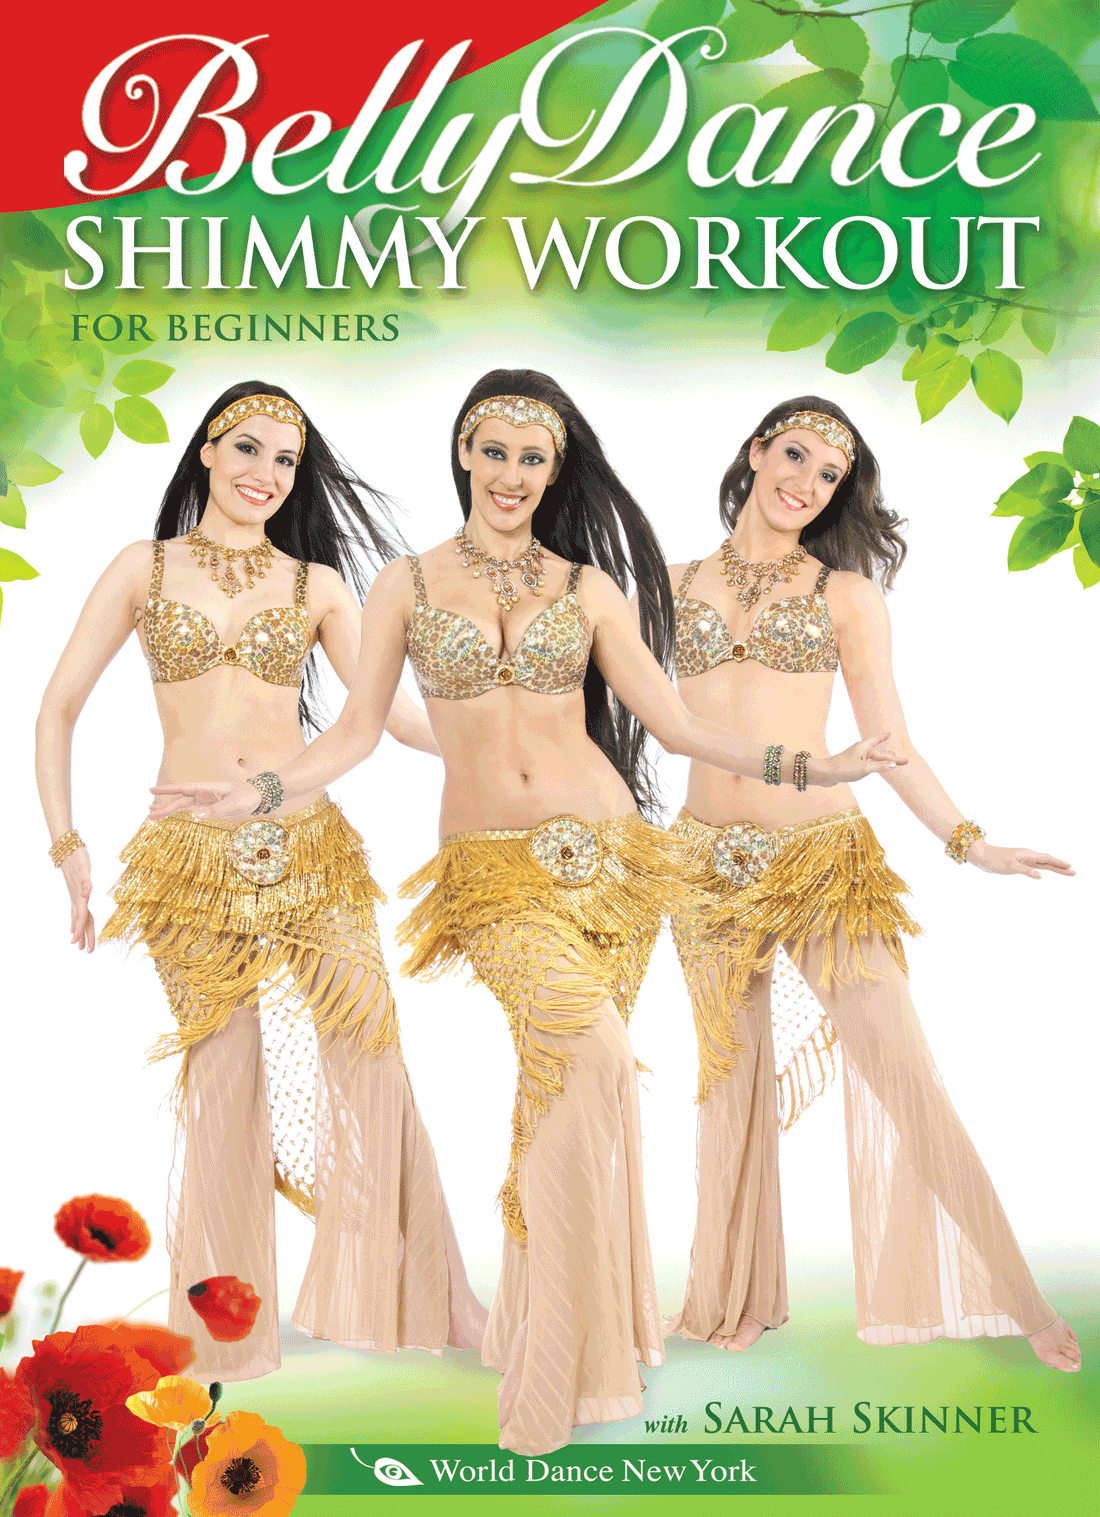 The Belly Dance Shimmy Workout - Open Level with Sarah Skinner - INSTANT VIDEO / DVD - World Dance New York